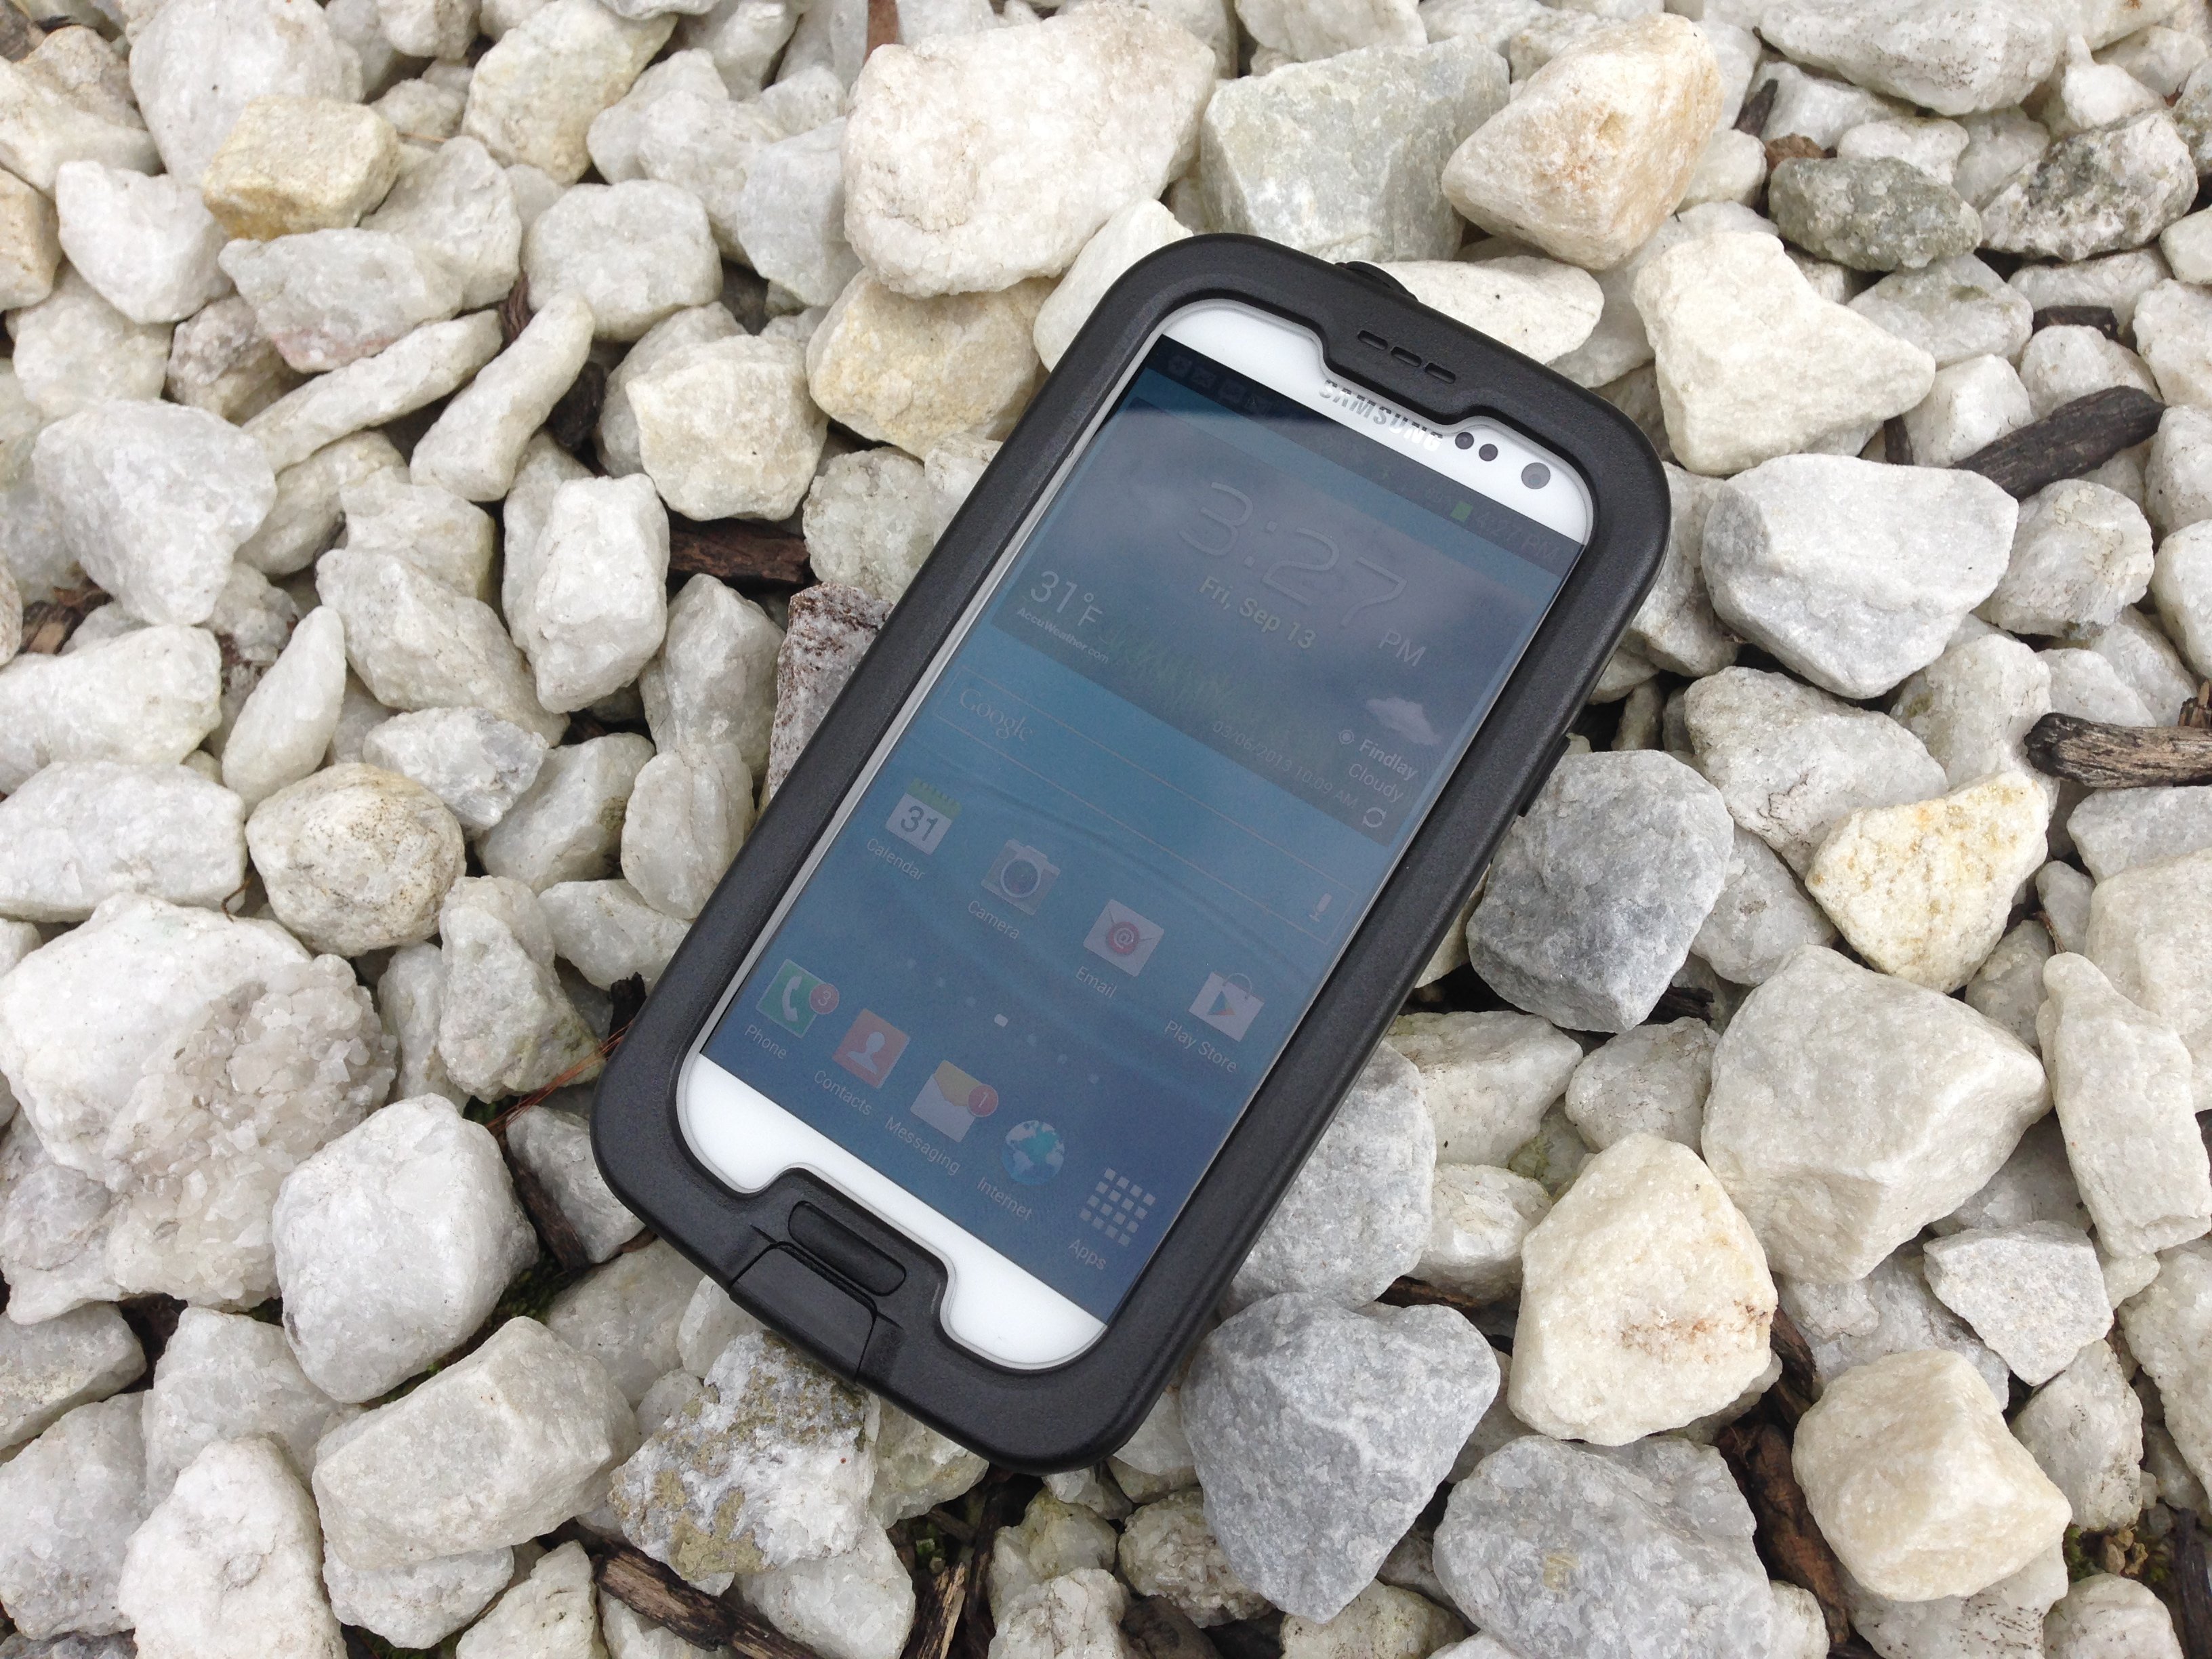 The LifeProof nuud Galaxy S3 case protects against water, dust, snow and drops.